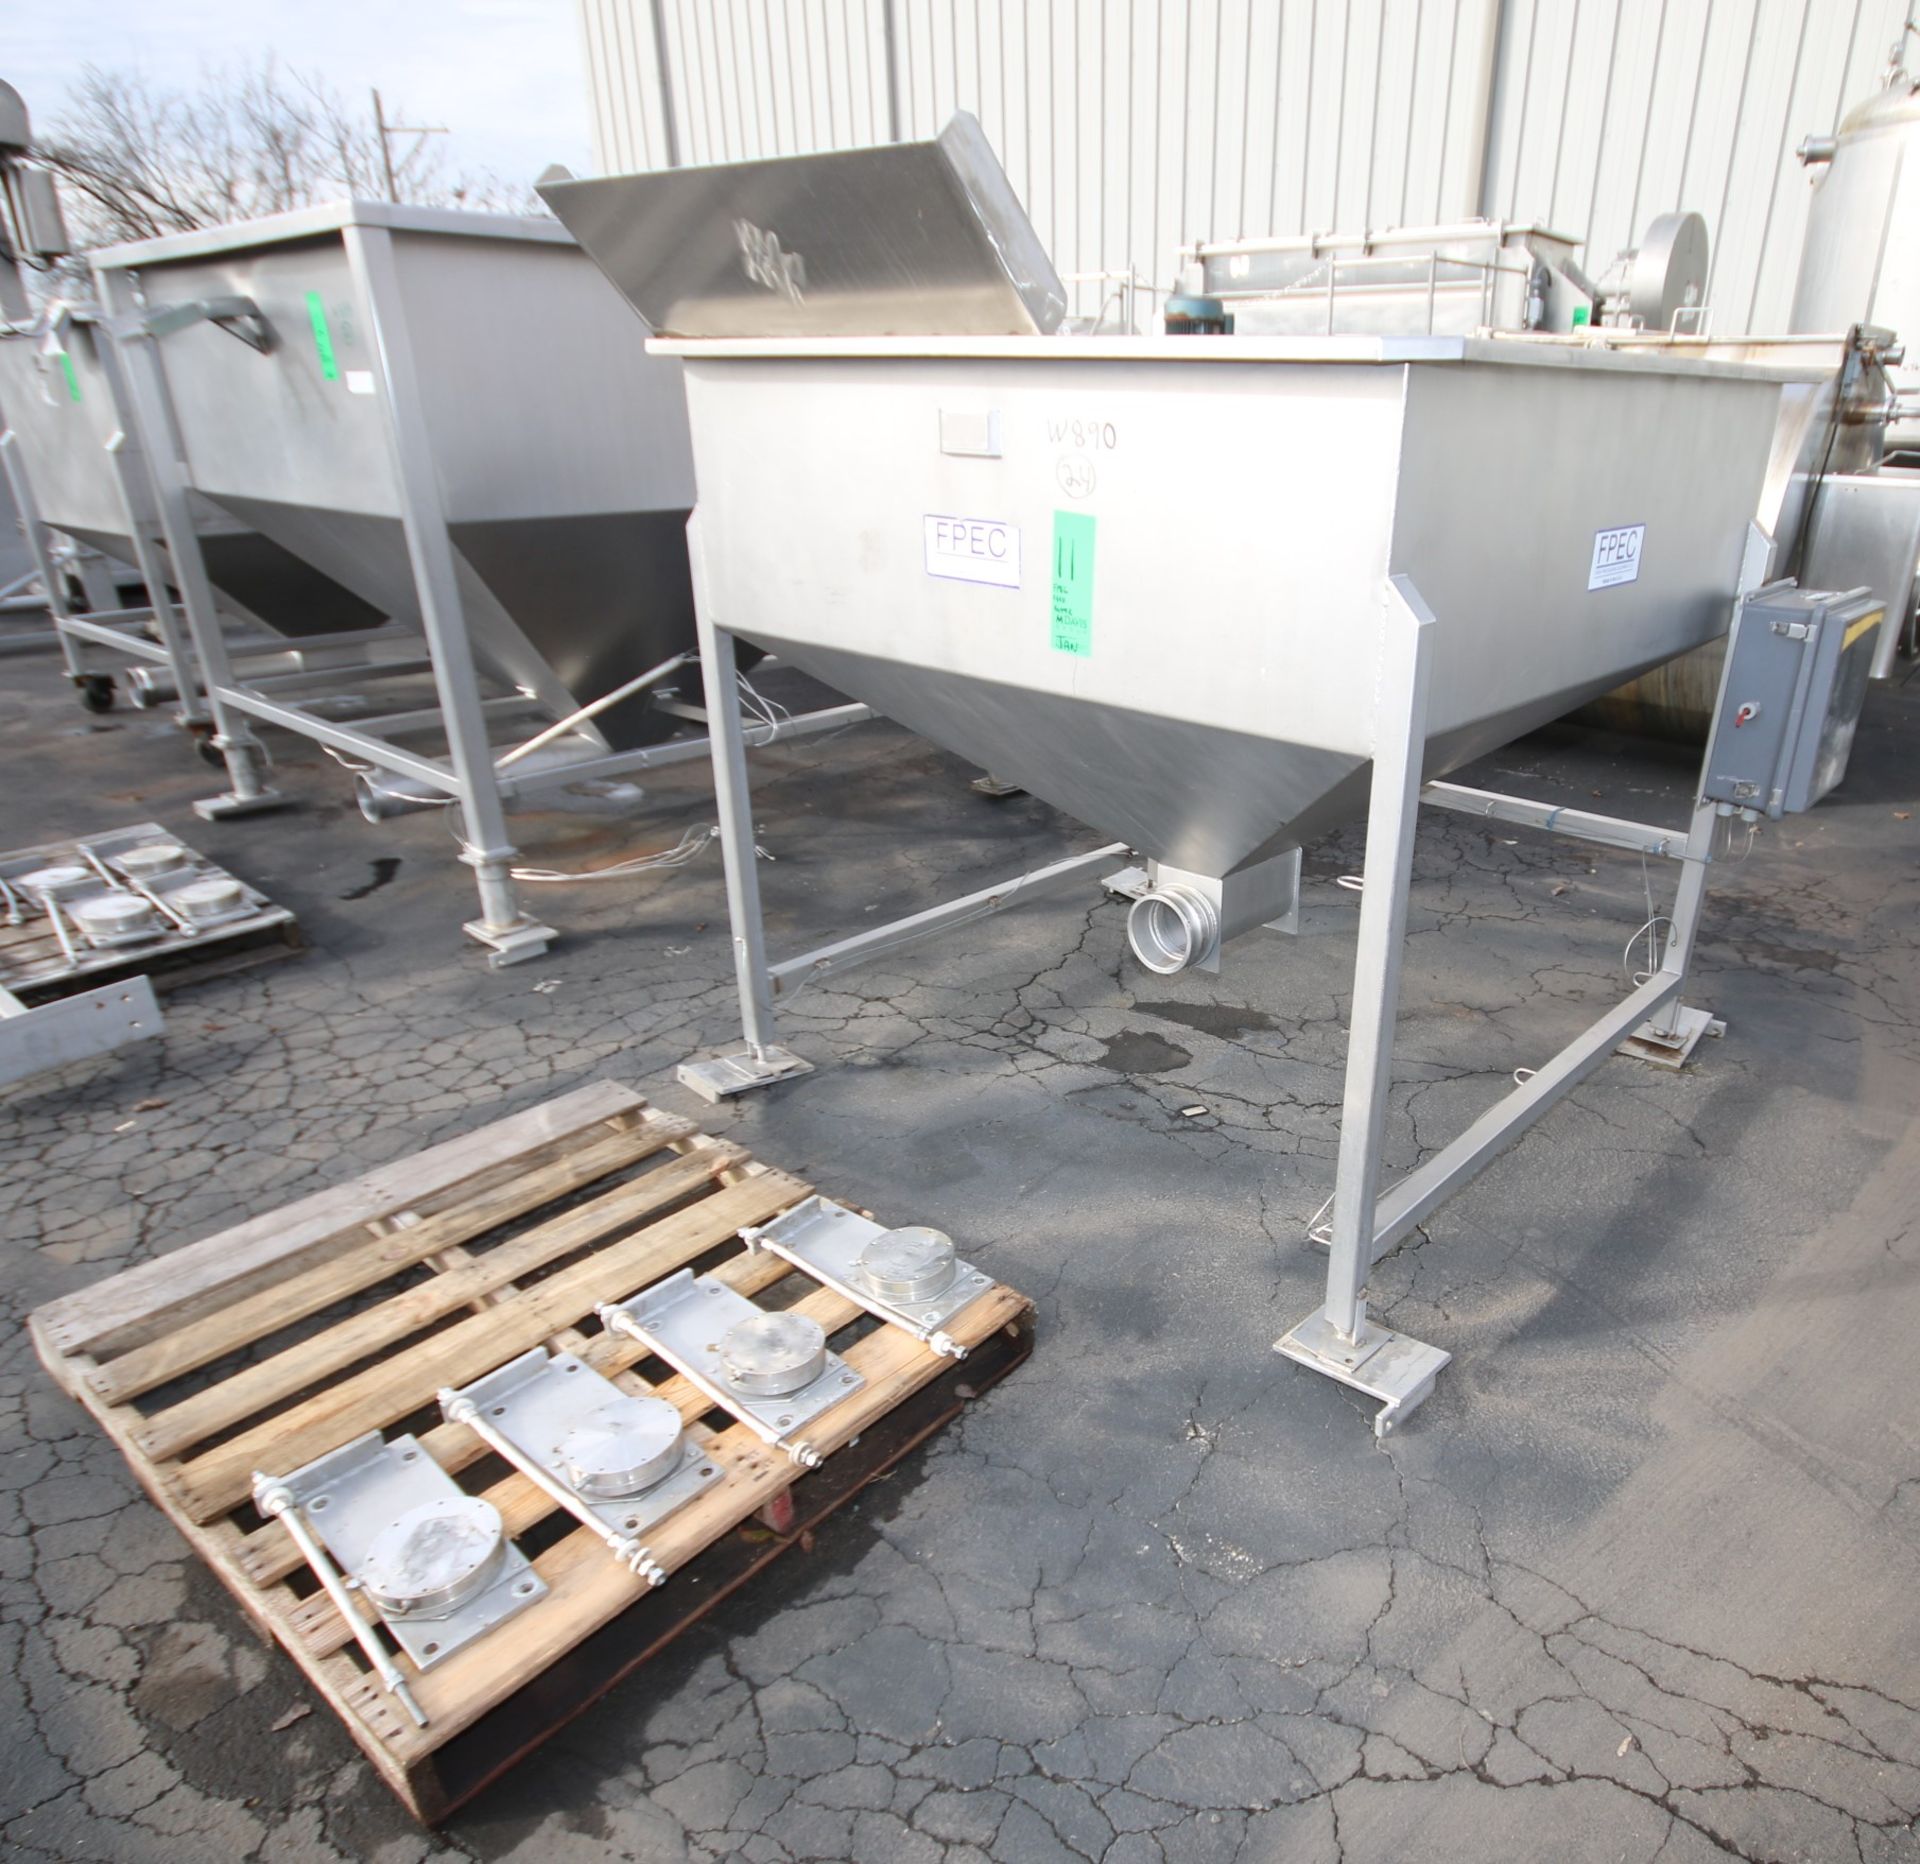 FPEC 60" W x 60" L x 36" D S/S Feed Hopper, Model VFH86, SN 6244, with 6" Discharge, Mounted on S/